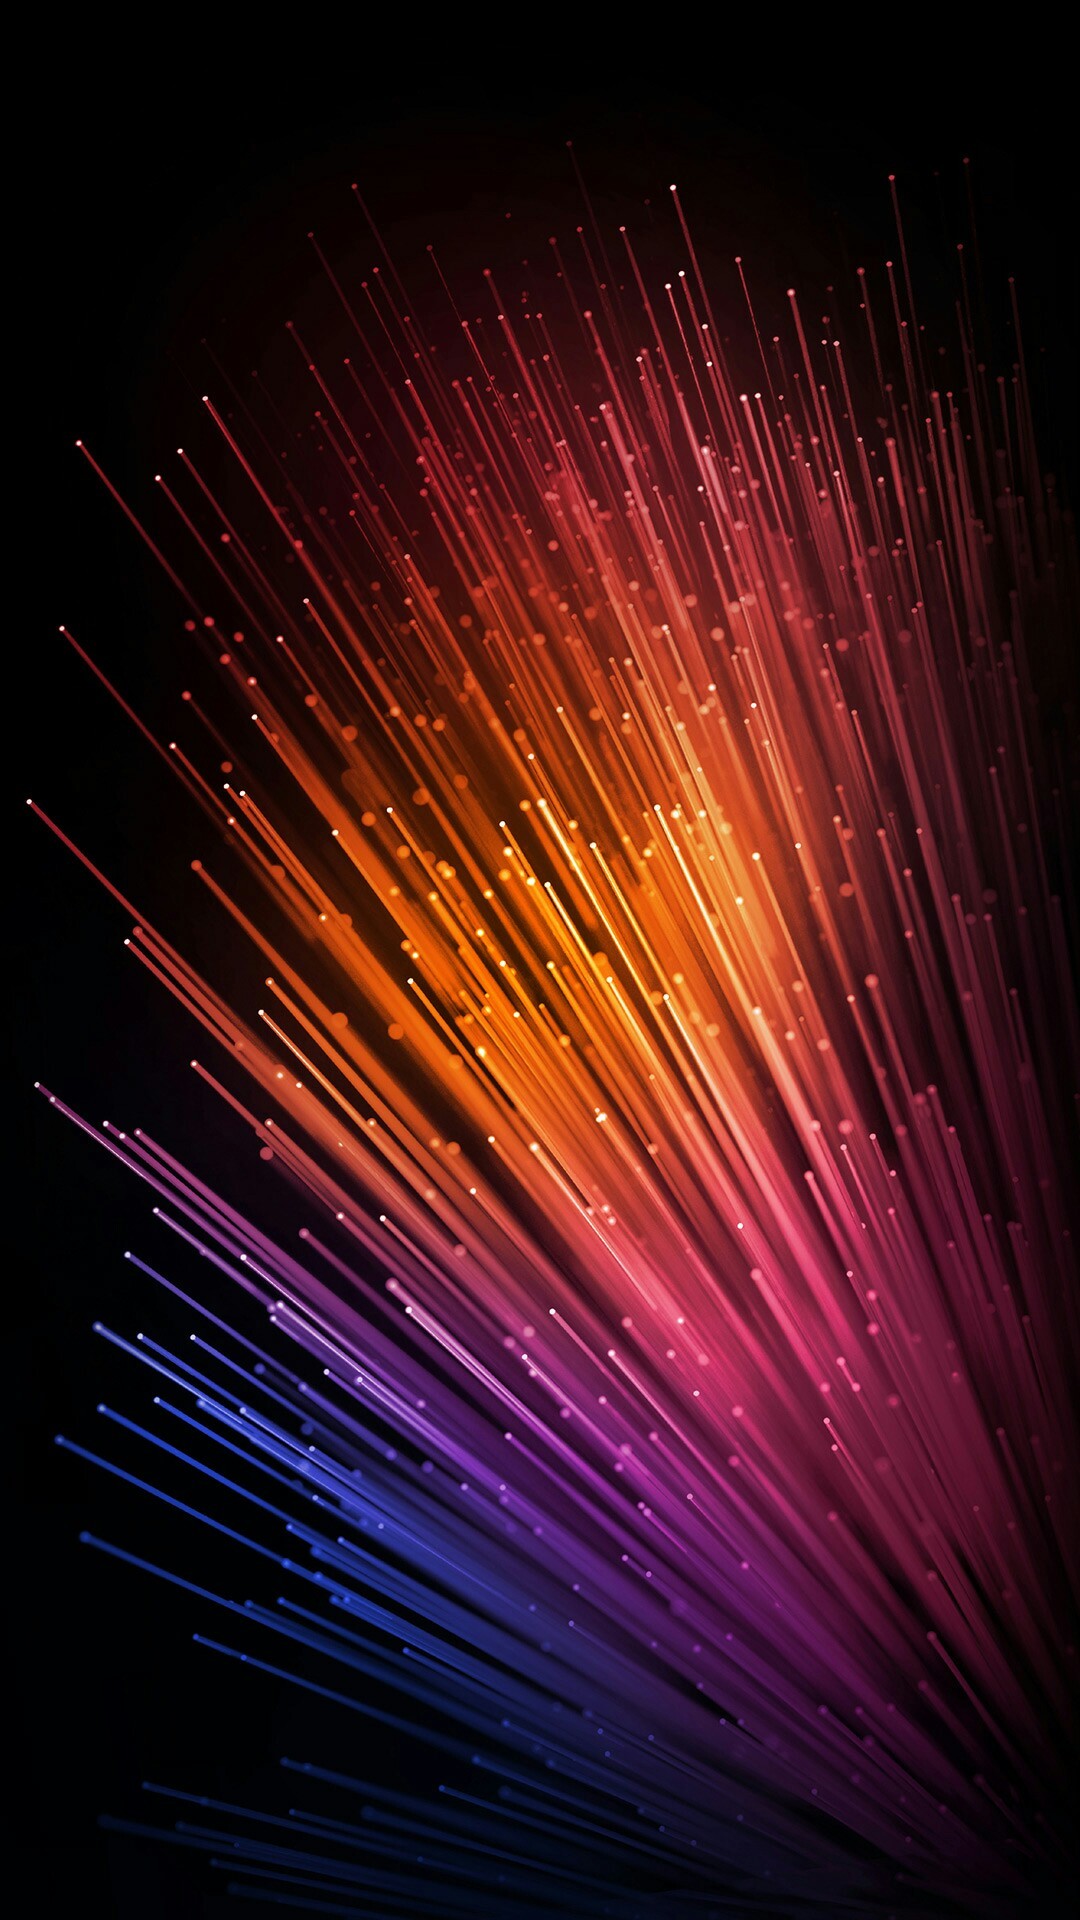 1080x1920 Colorful Backgrounds, Ios, Phone Wallpapers, Screen Wallpaper, Mobile  Wallpaper, Wallpaper For, Crafts, Apple Iphone, Iphone 4s